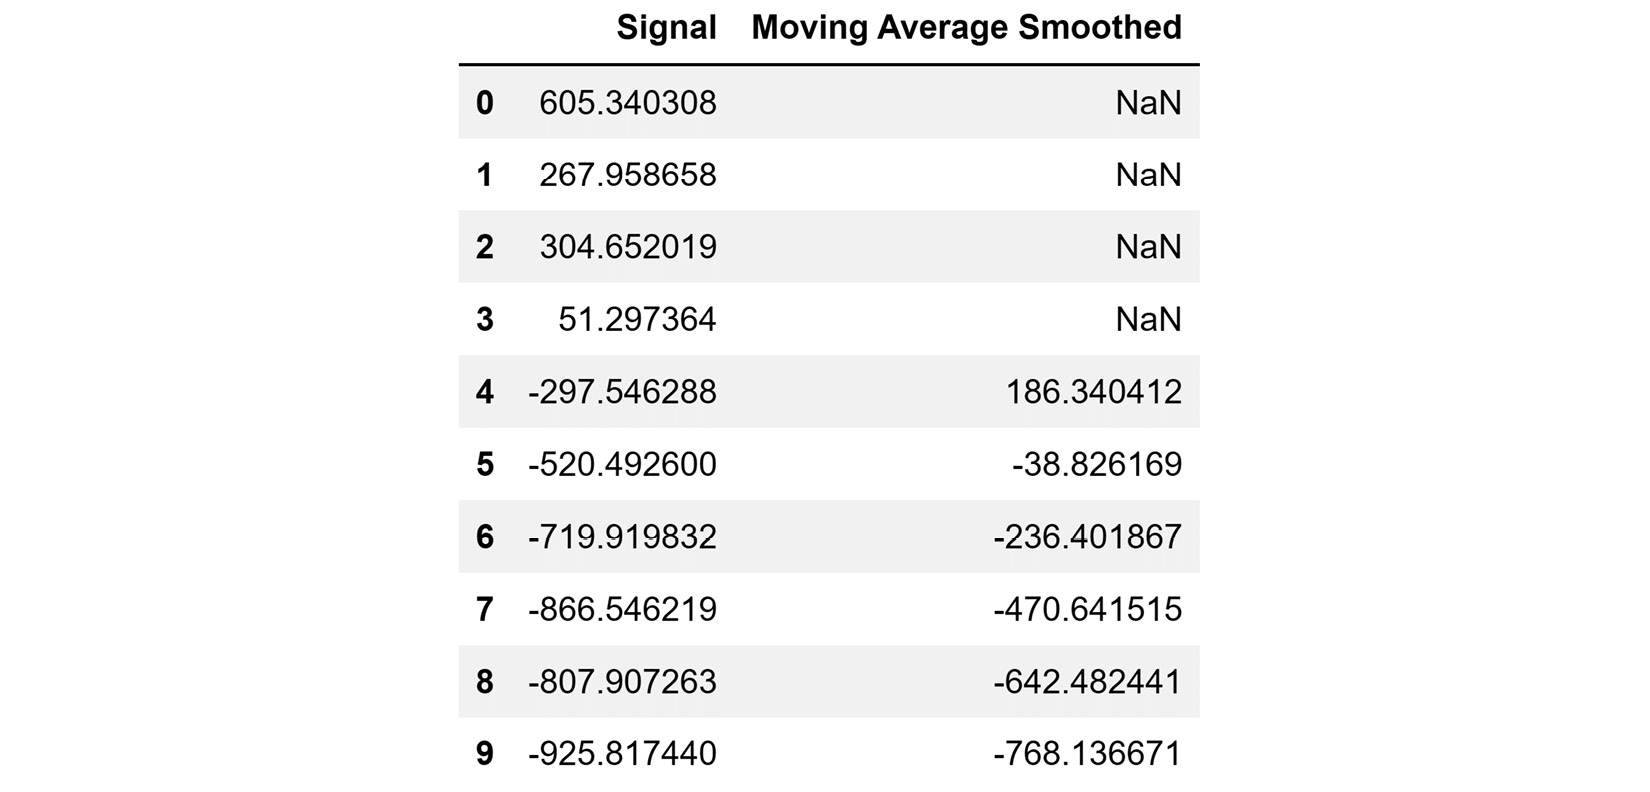 Figure 14.23 – Comparing the Signal and Moving Average Smoothed columns
